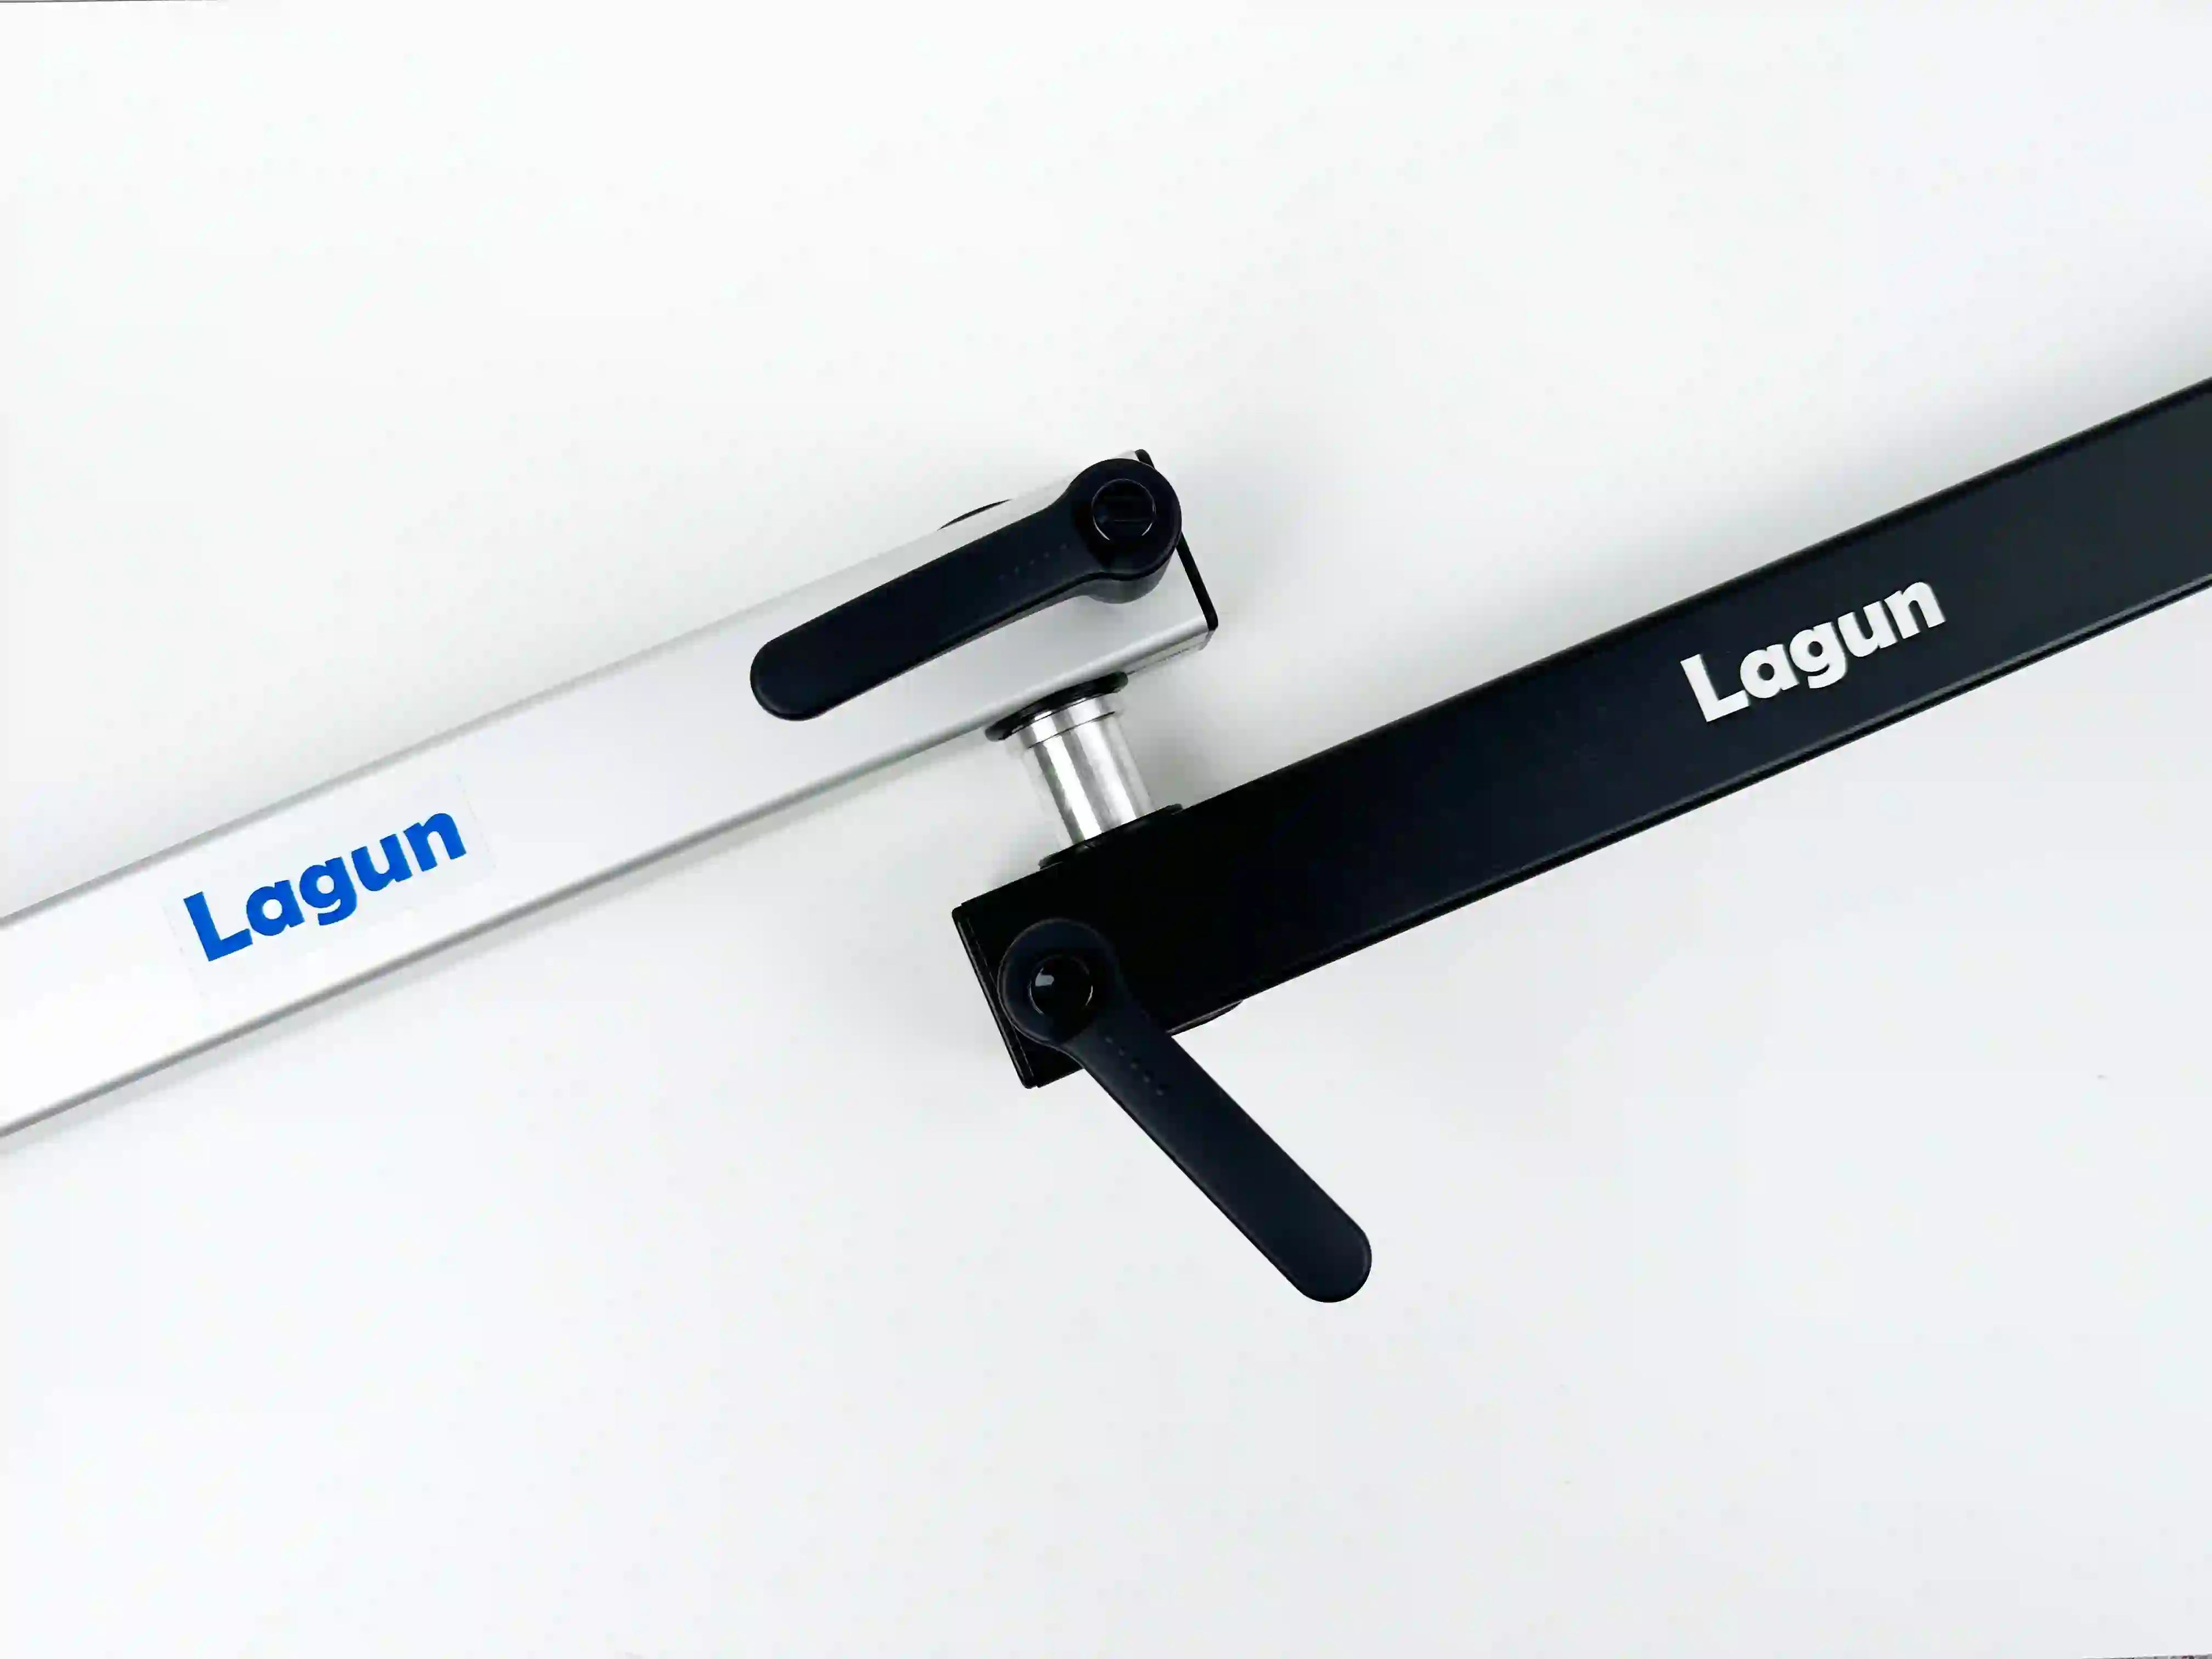 Lagun table extension bolts for connecting two arms